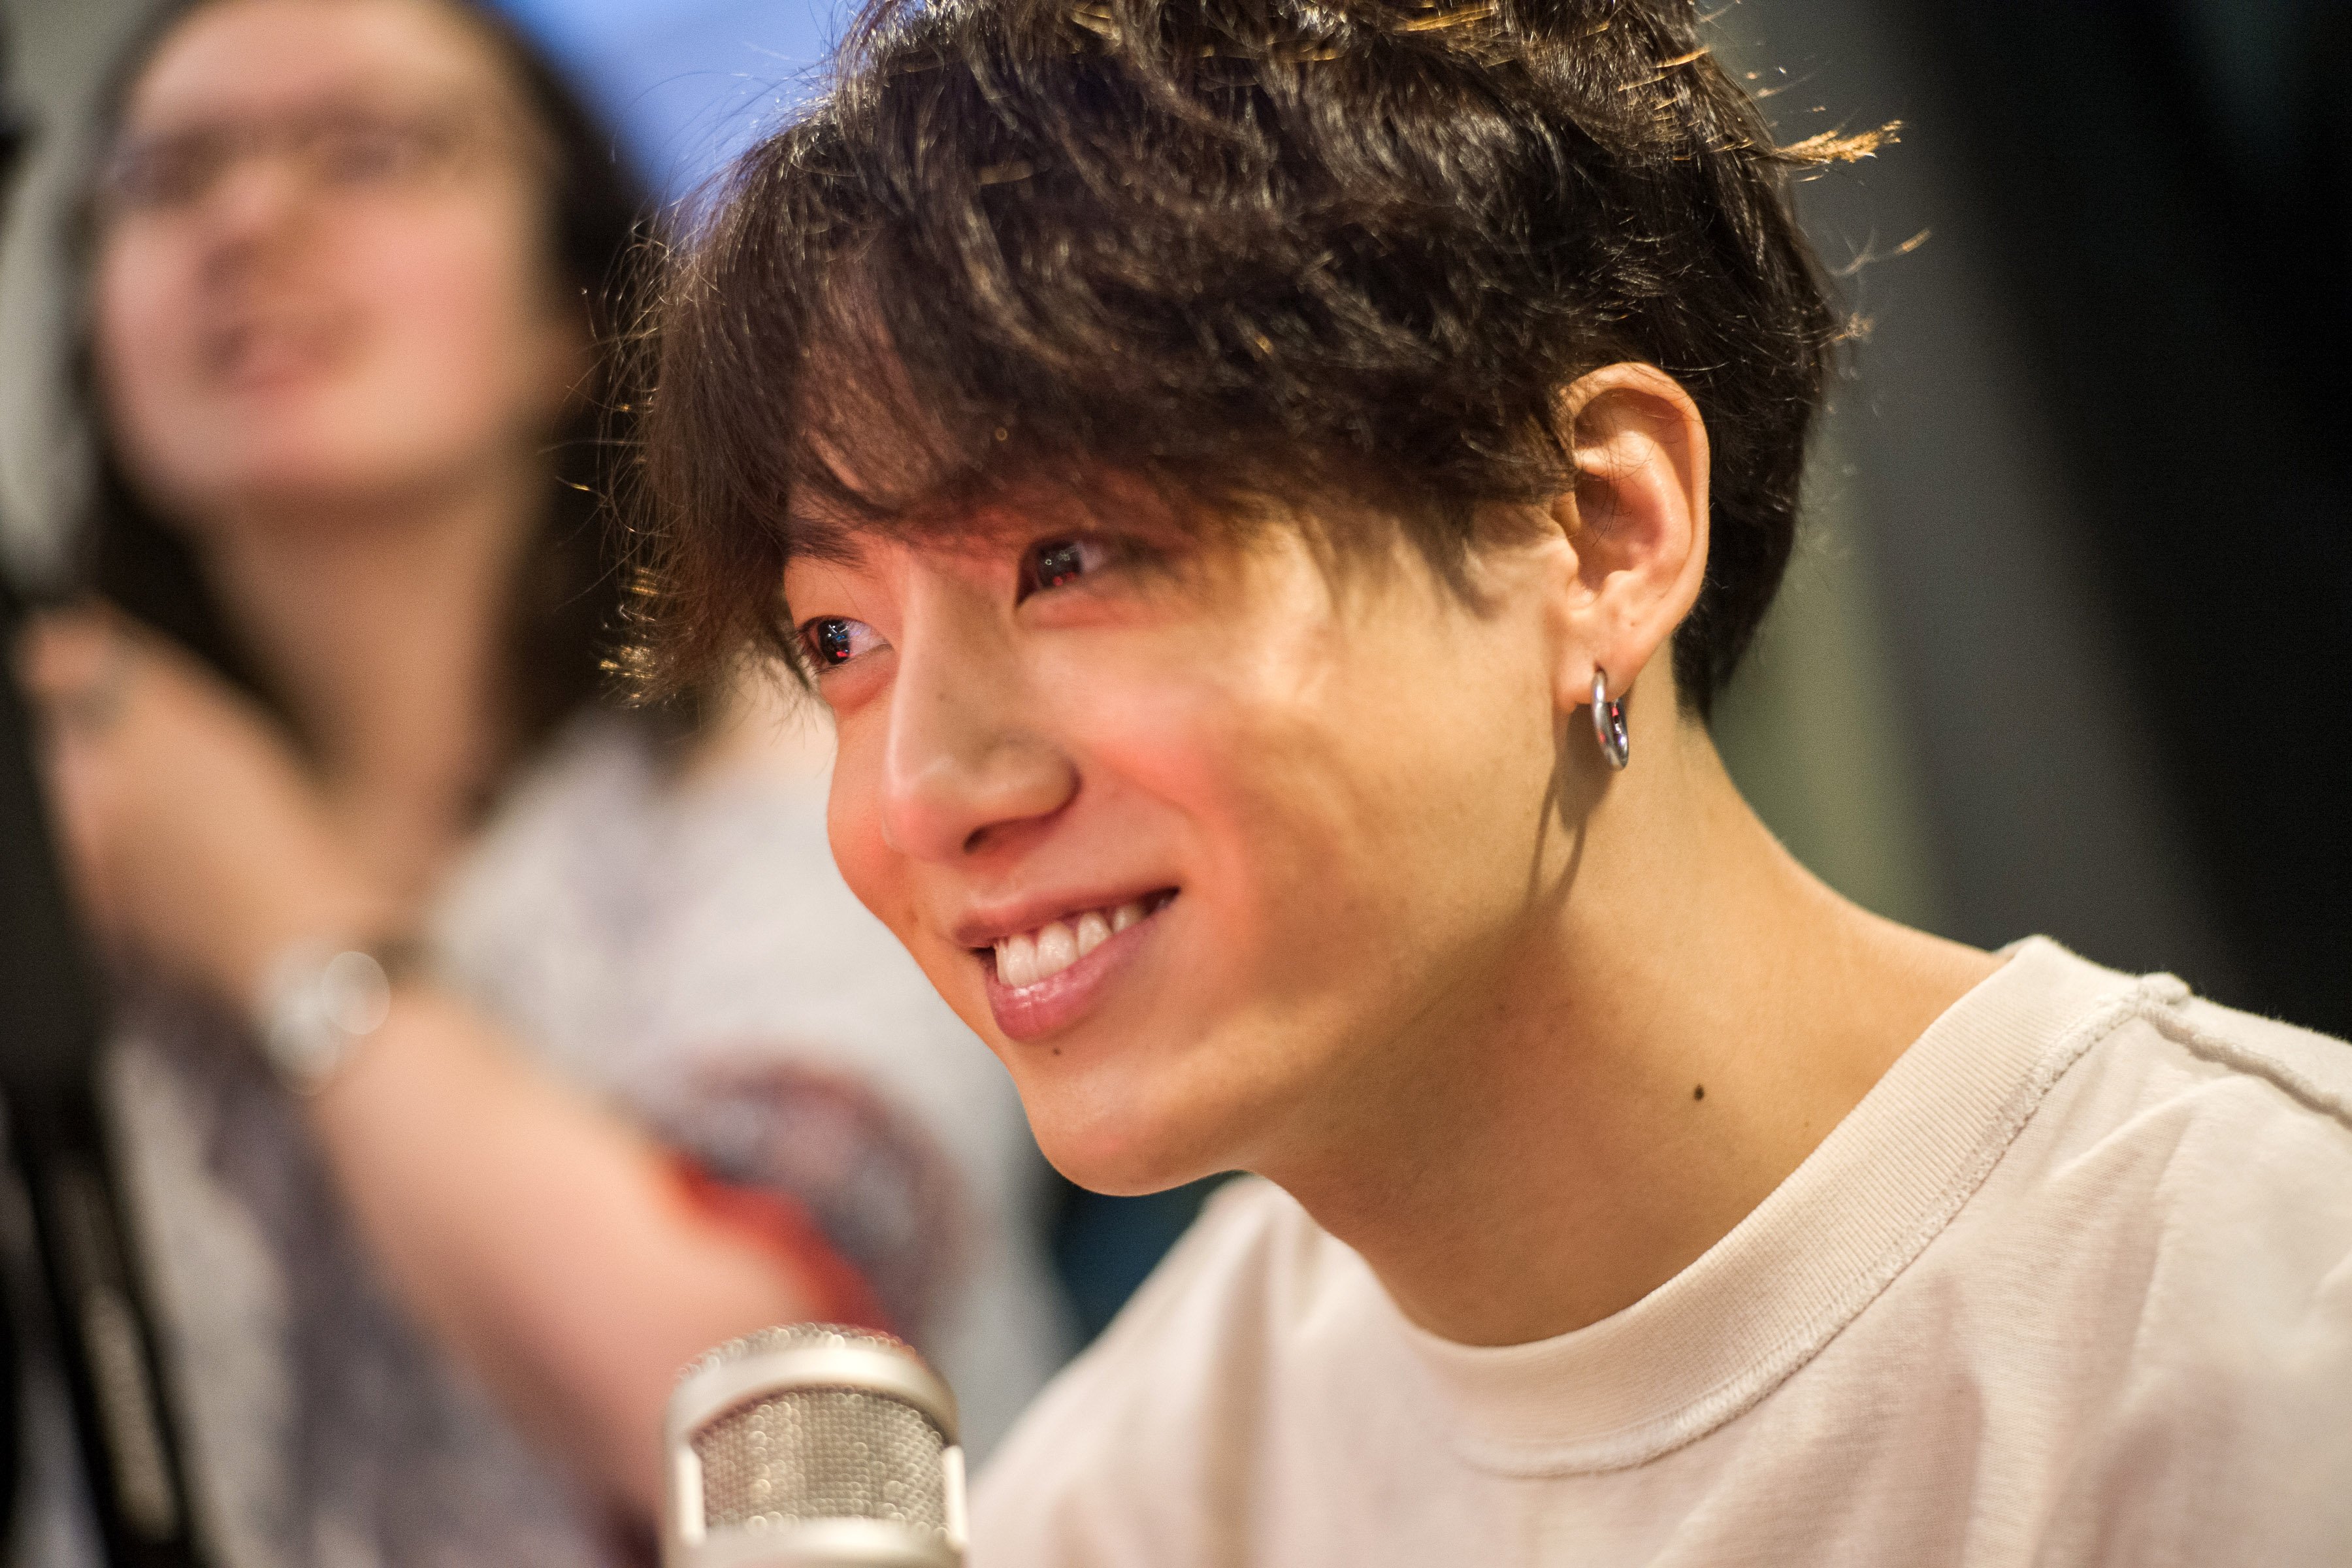 BTS' Jungkook on The Elvis Duran Z100 Morning Show smiling and sitting in front of a microphone